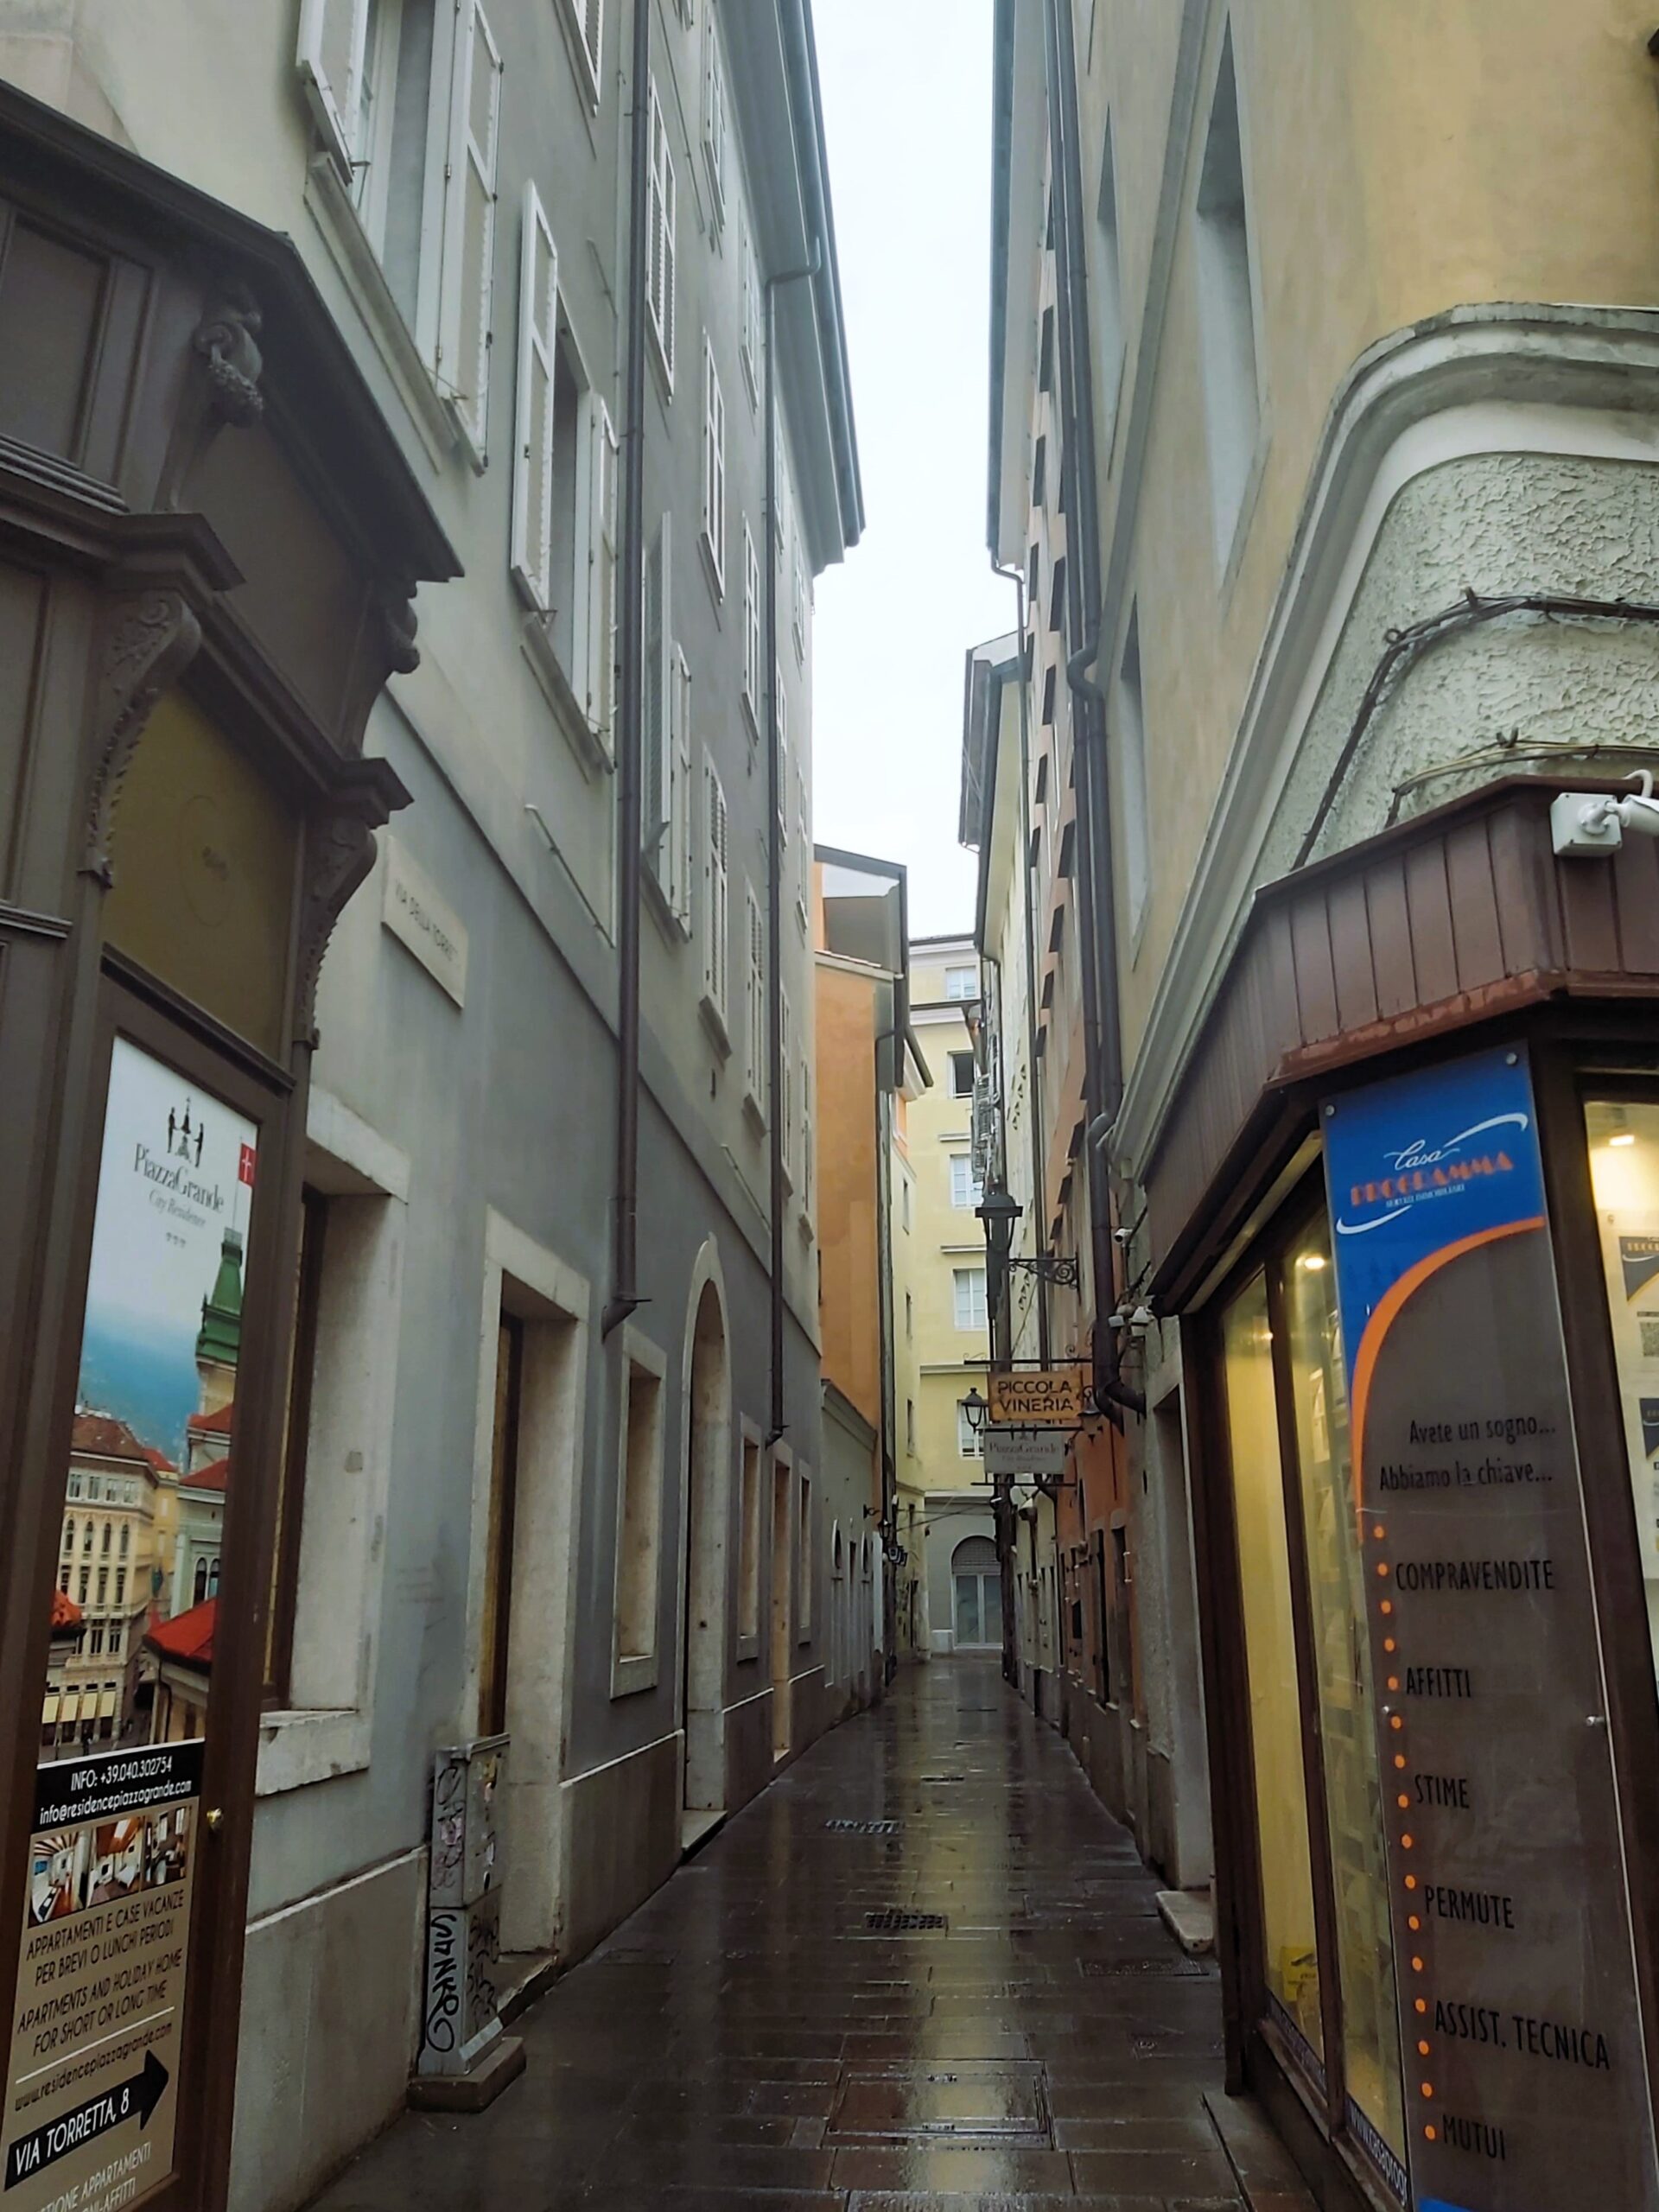 Another narrow street in Trieste, Italy